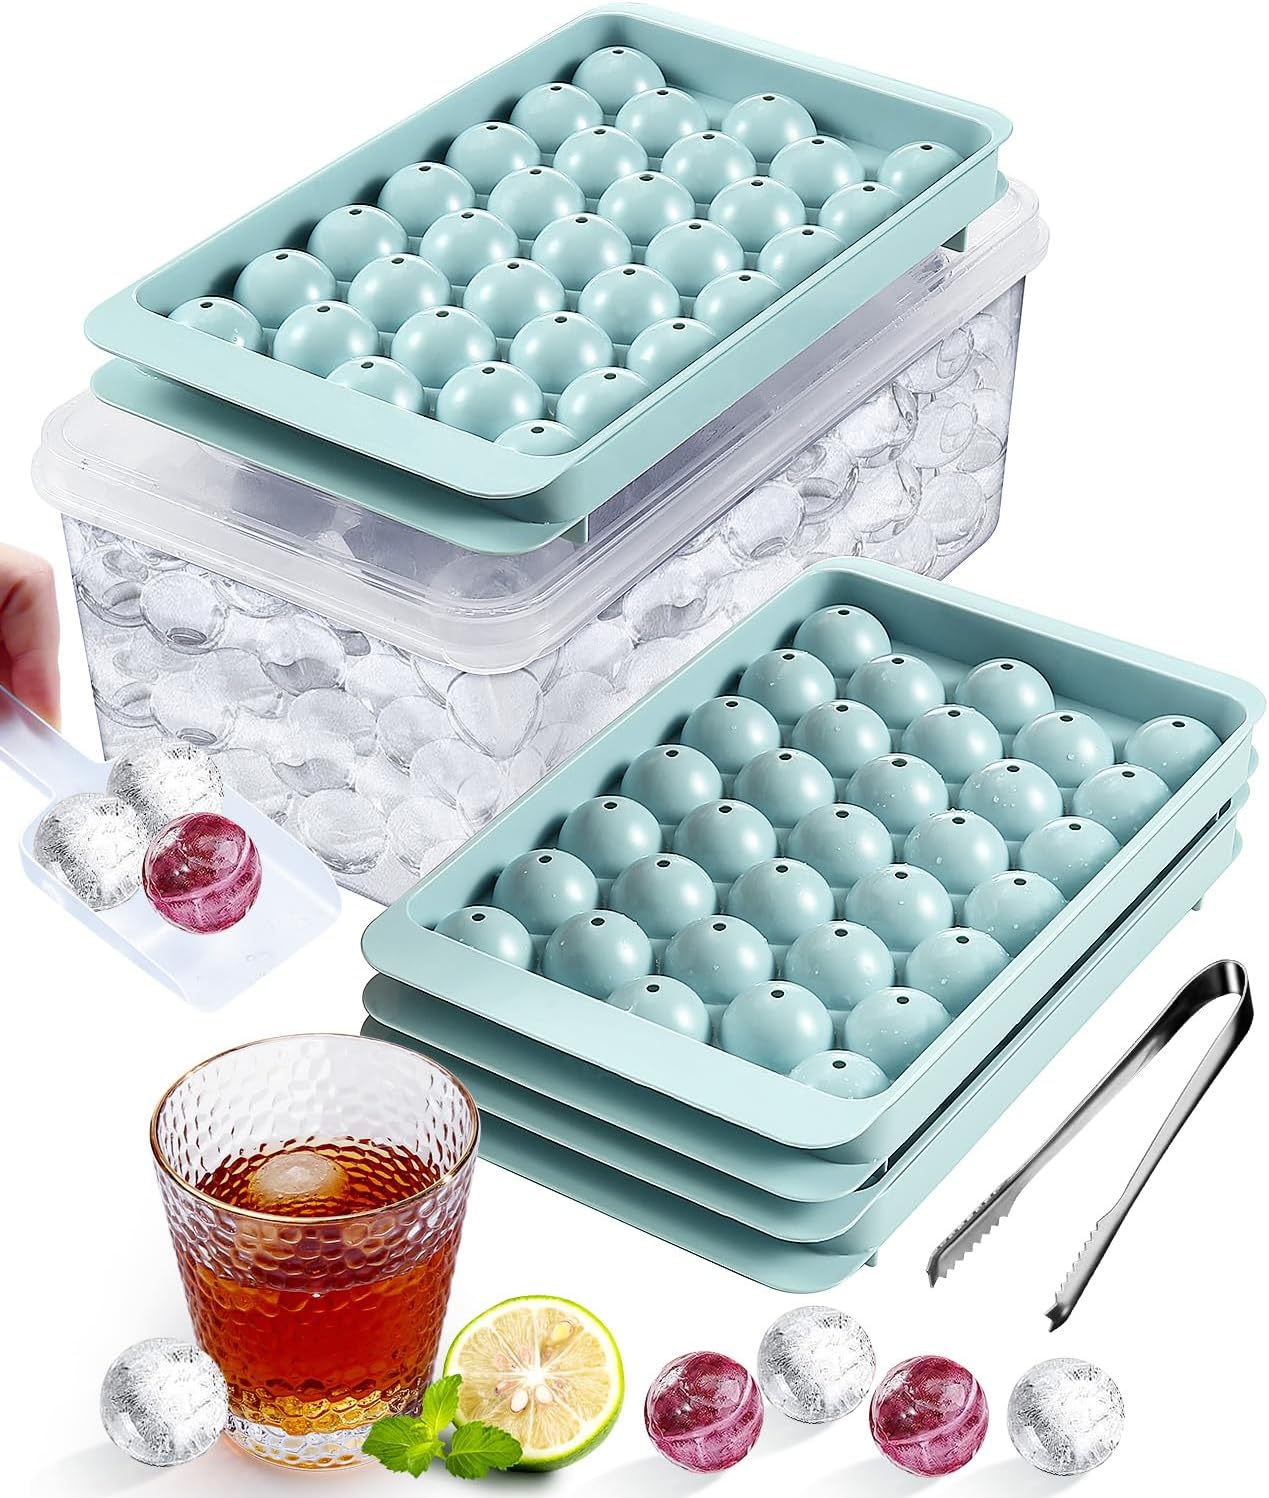 These ice cube trays work great. Tried the silicon ones and they were not good. These are easy to use and make perfect ice balls. About the size of bouncy balls. Easy to fill just add water till all are full plus a little bit more then close. Easy to get cubes out. Very Happy